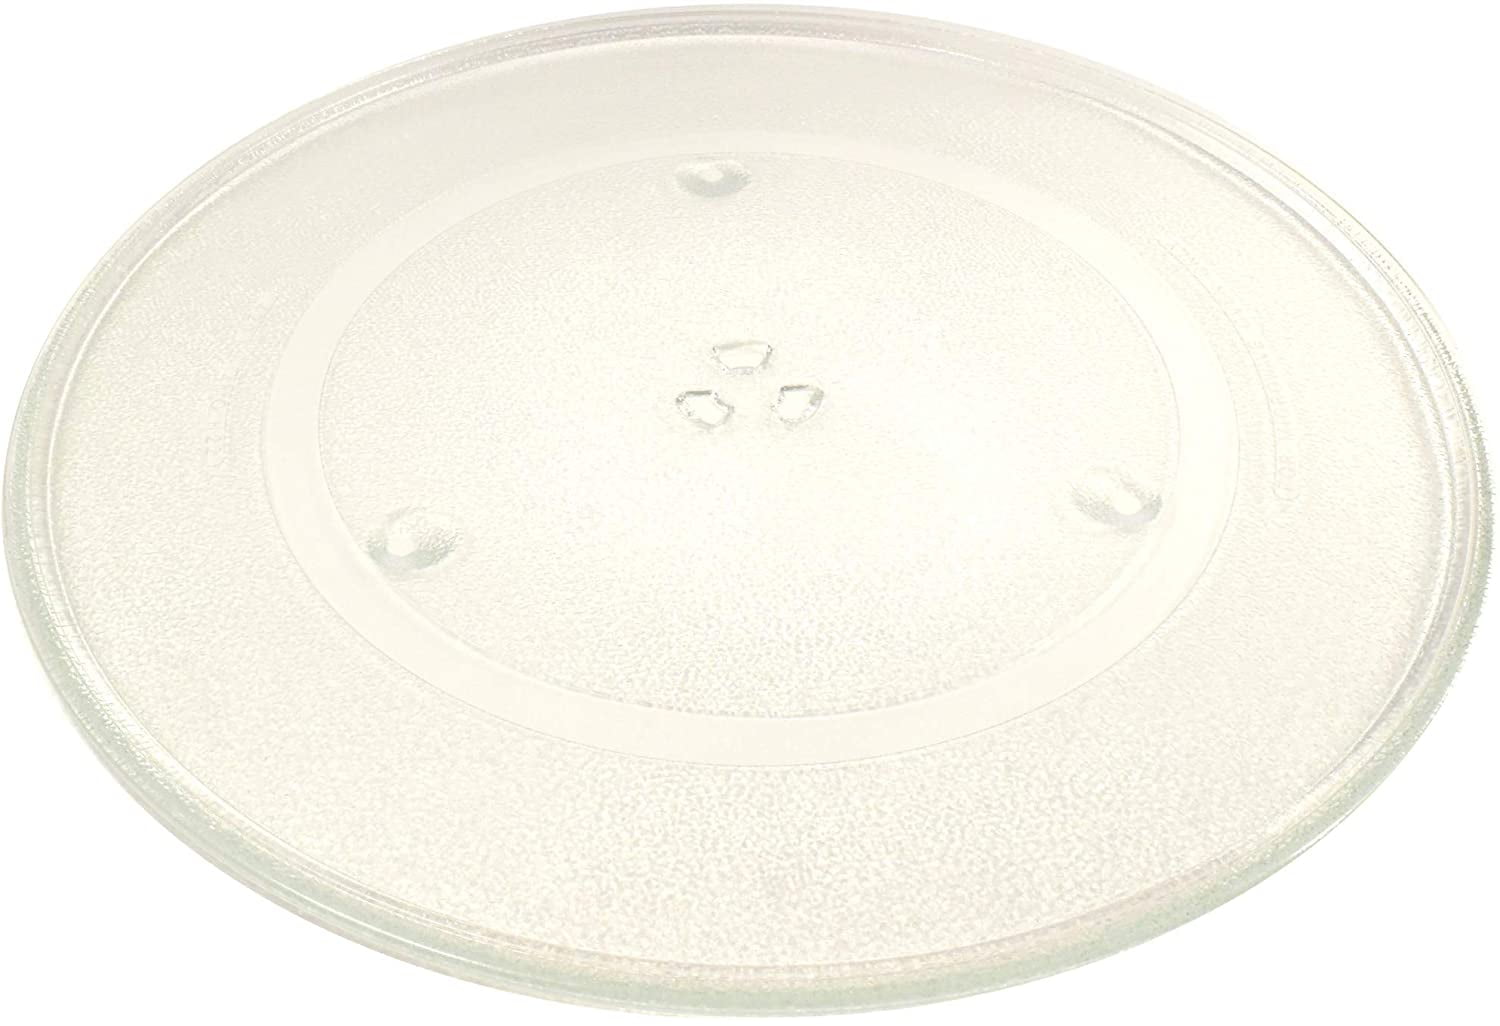 12-3/8" Glass Turntable Tray for Panasonic NN Series Microwave Oven Plate 315mm 